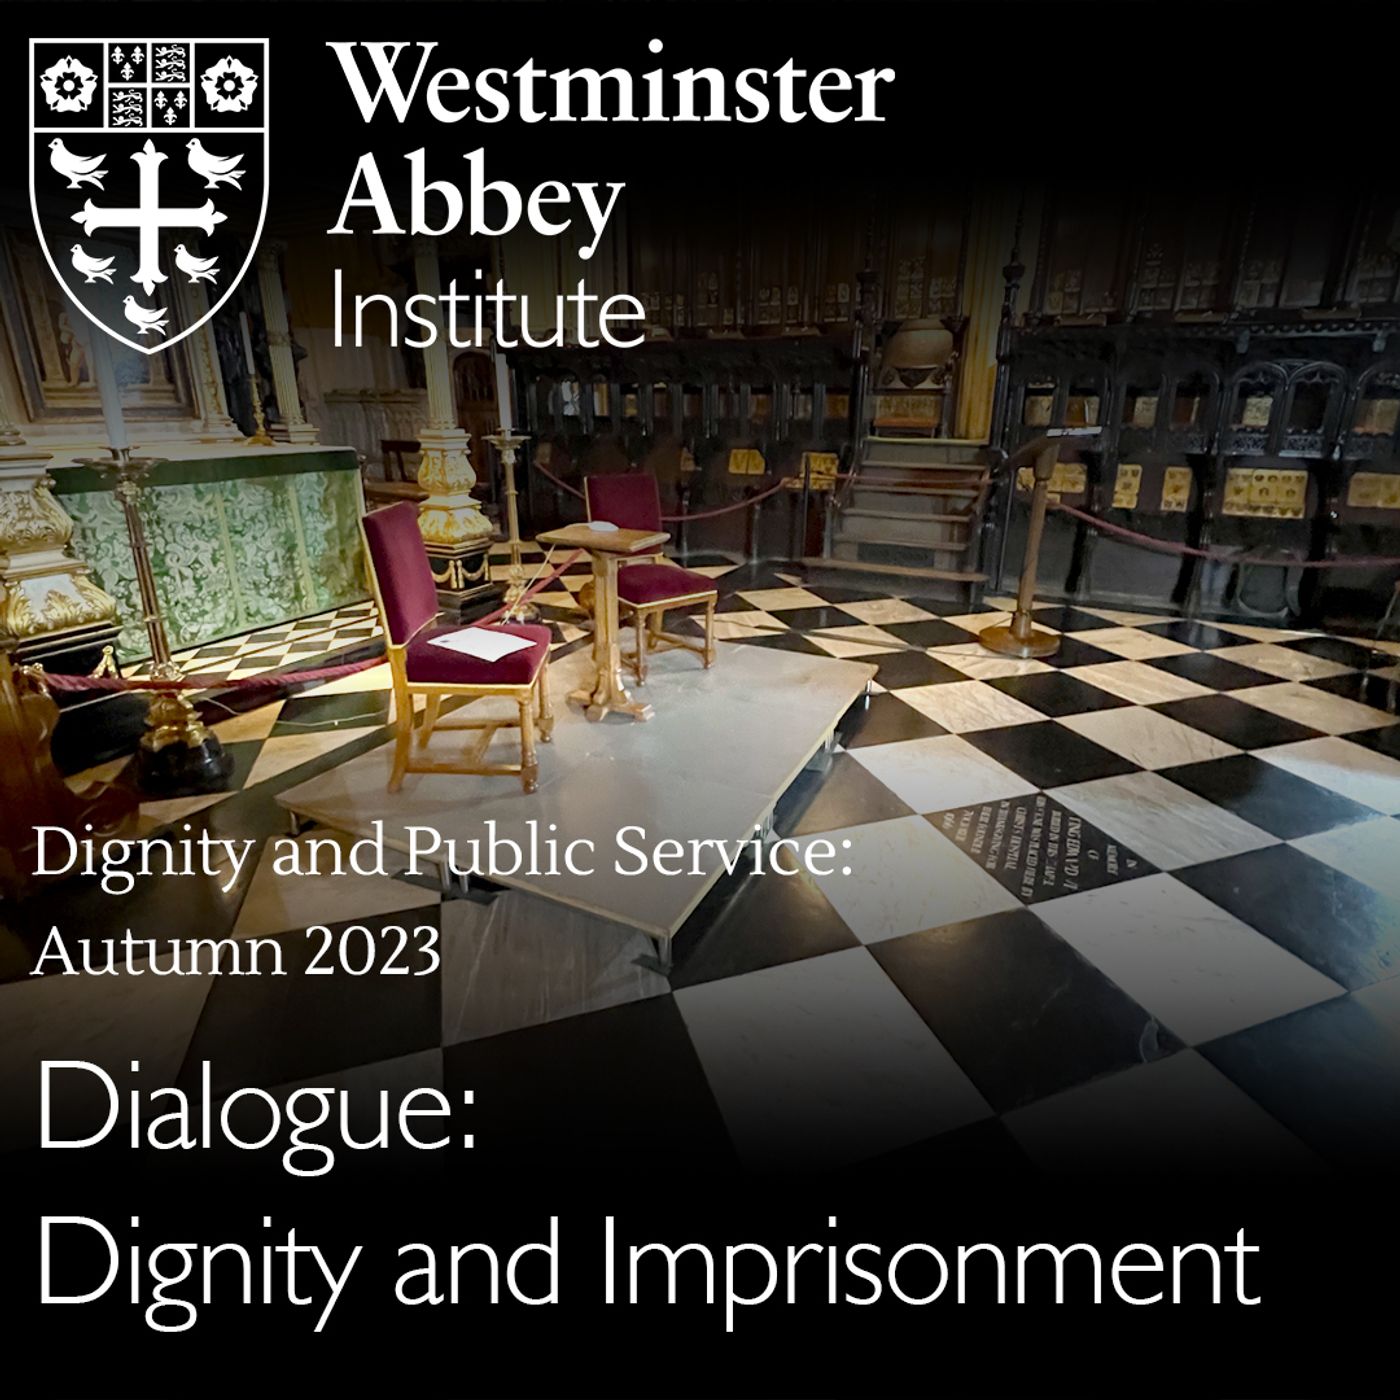 Dialogue: Dignity and Imprisonment